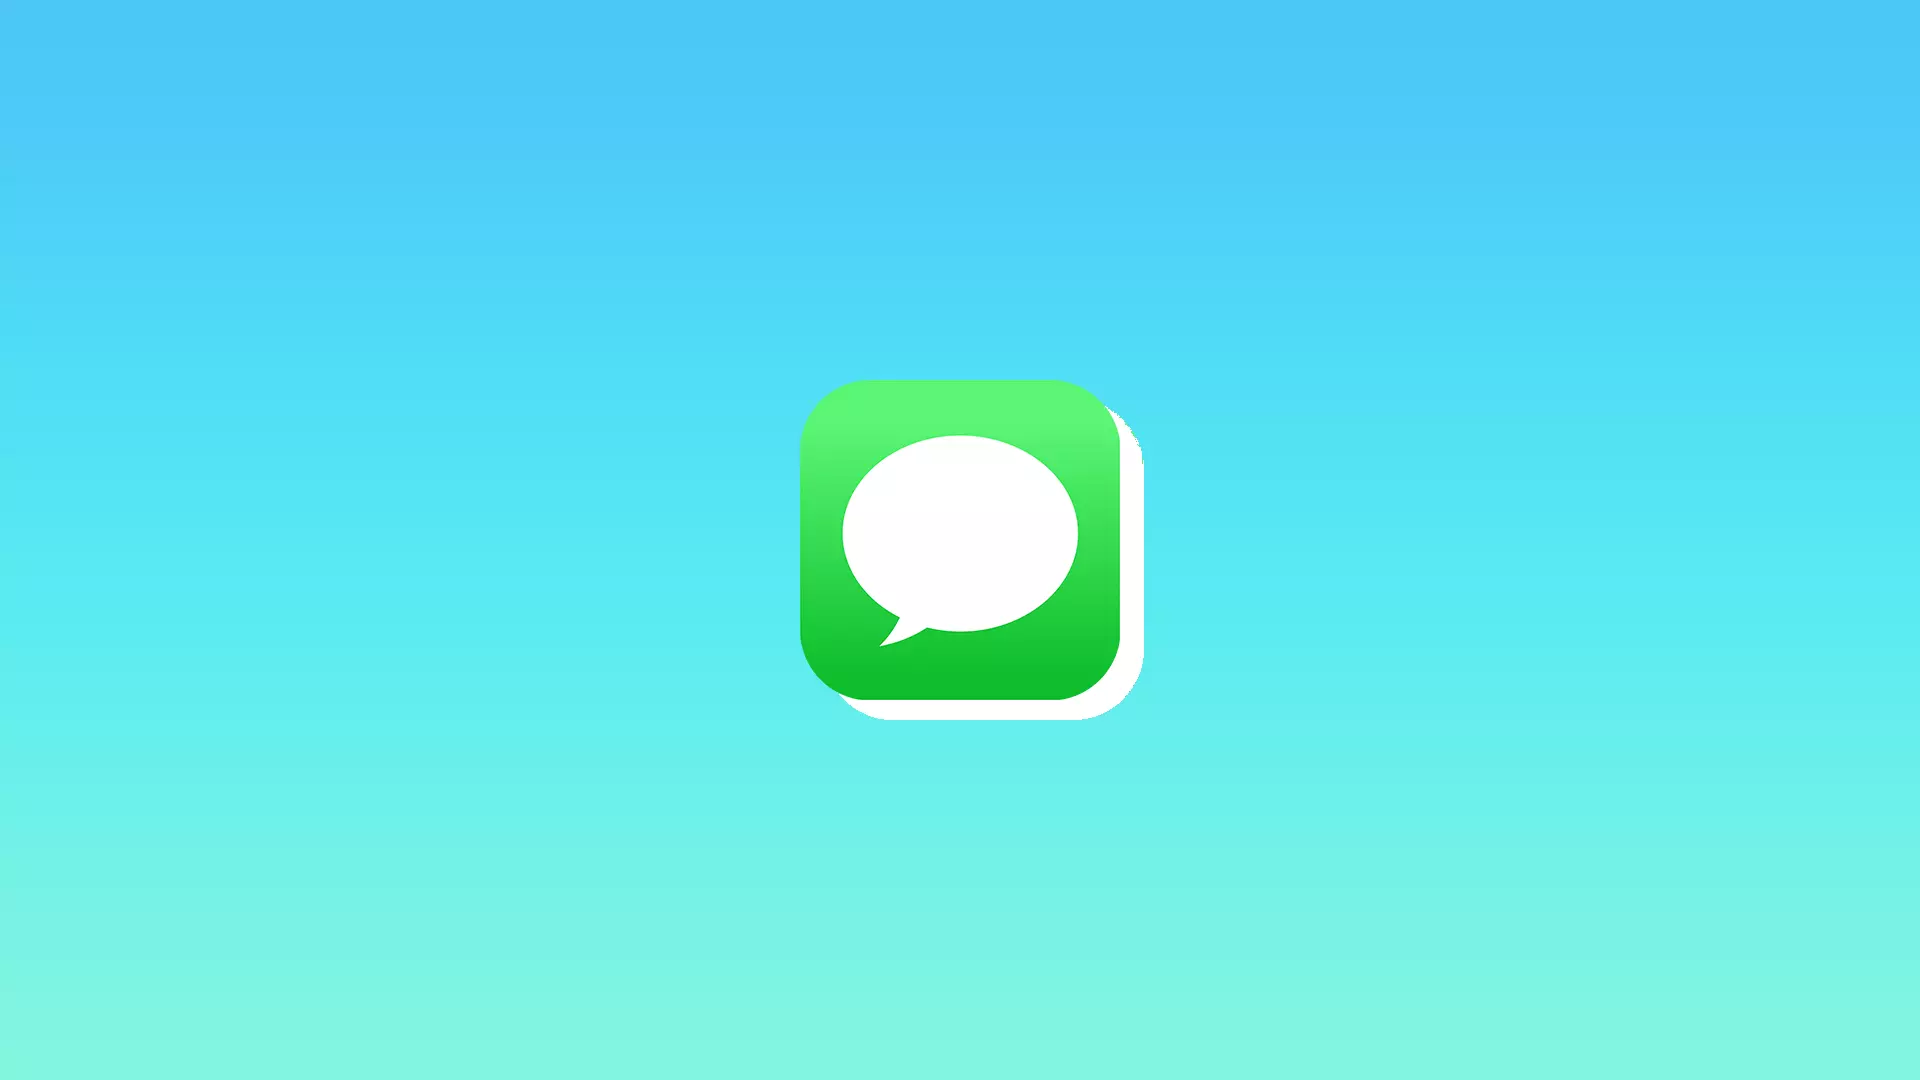 What is the green Join button in iMessage